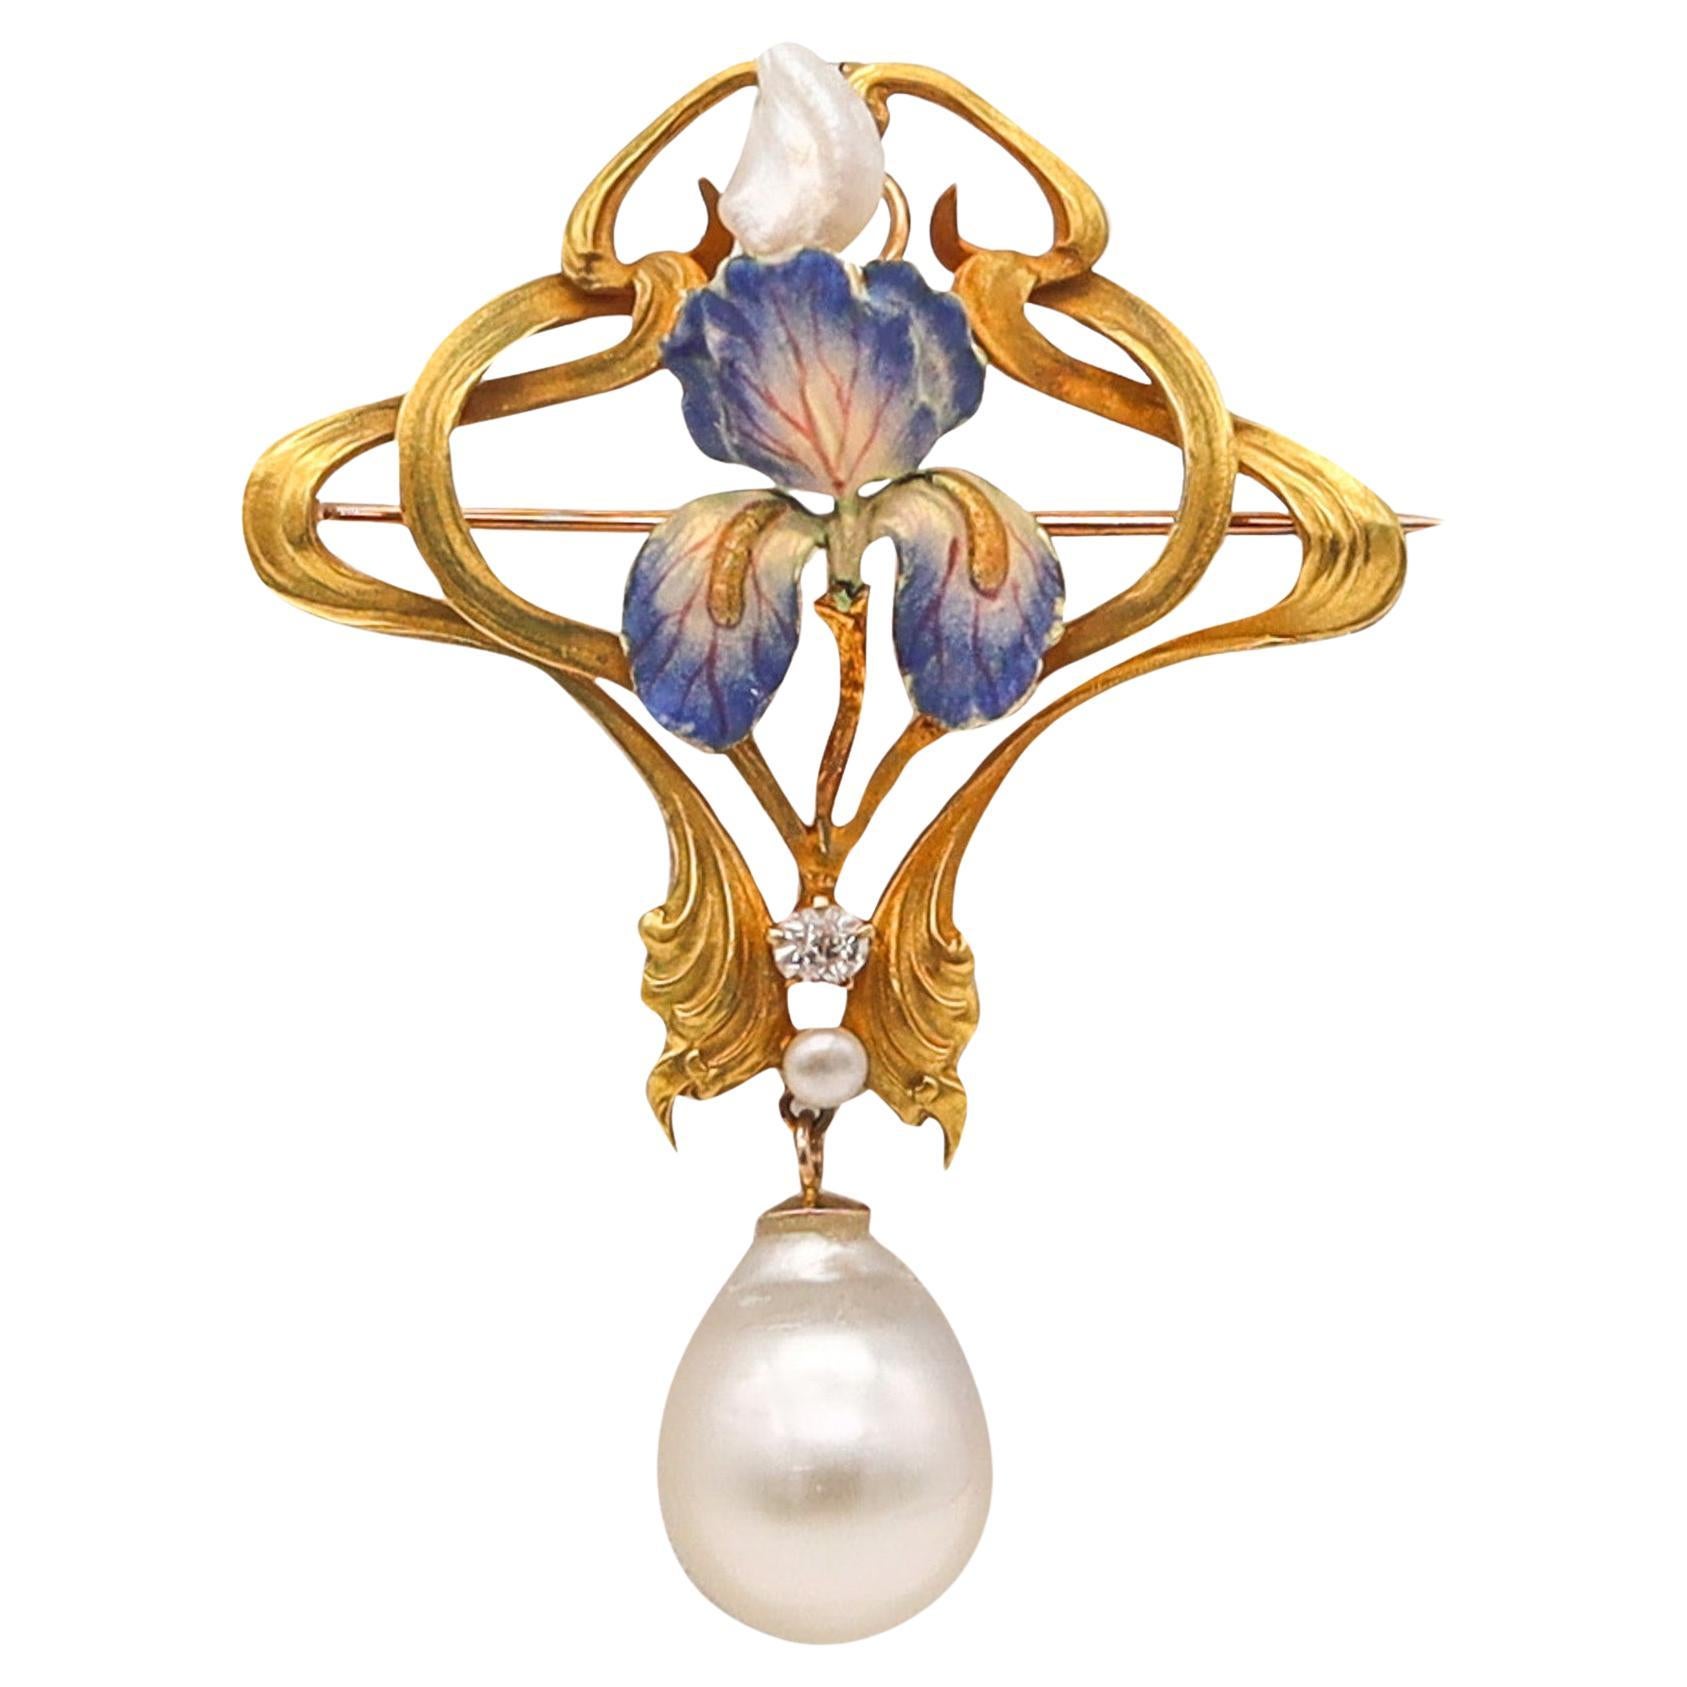 Art Nouveau 1900 Enamel Orchid Pendant In 14Kt Gold With Diamond And Pearls For Sale